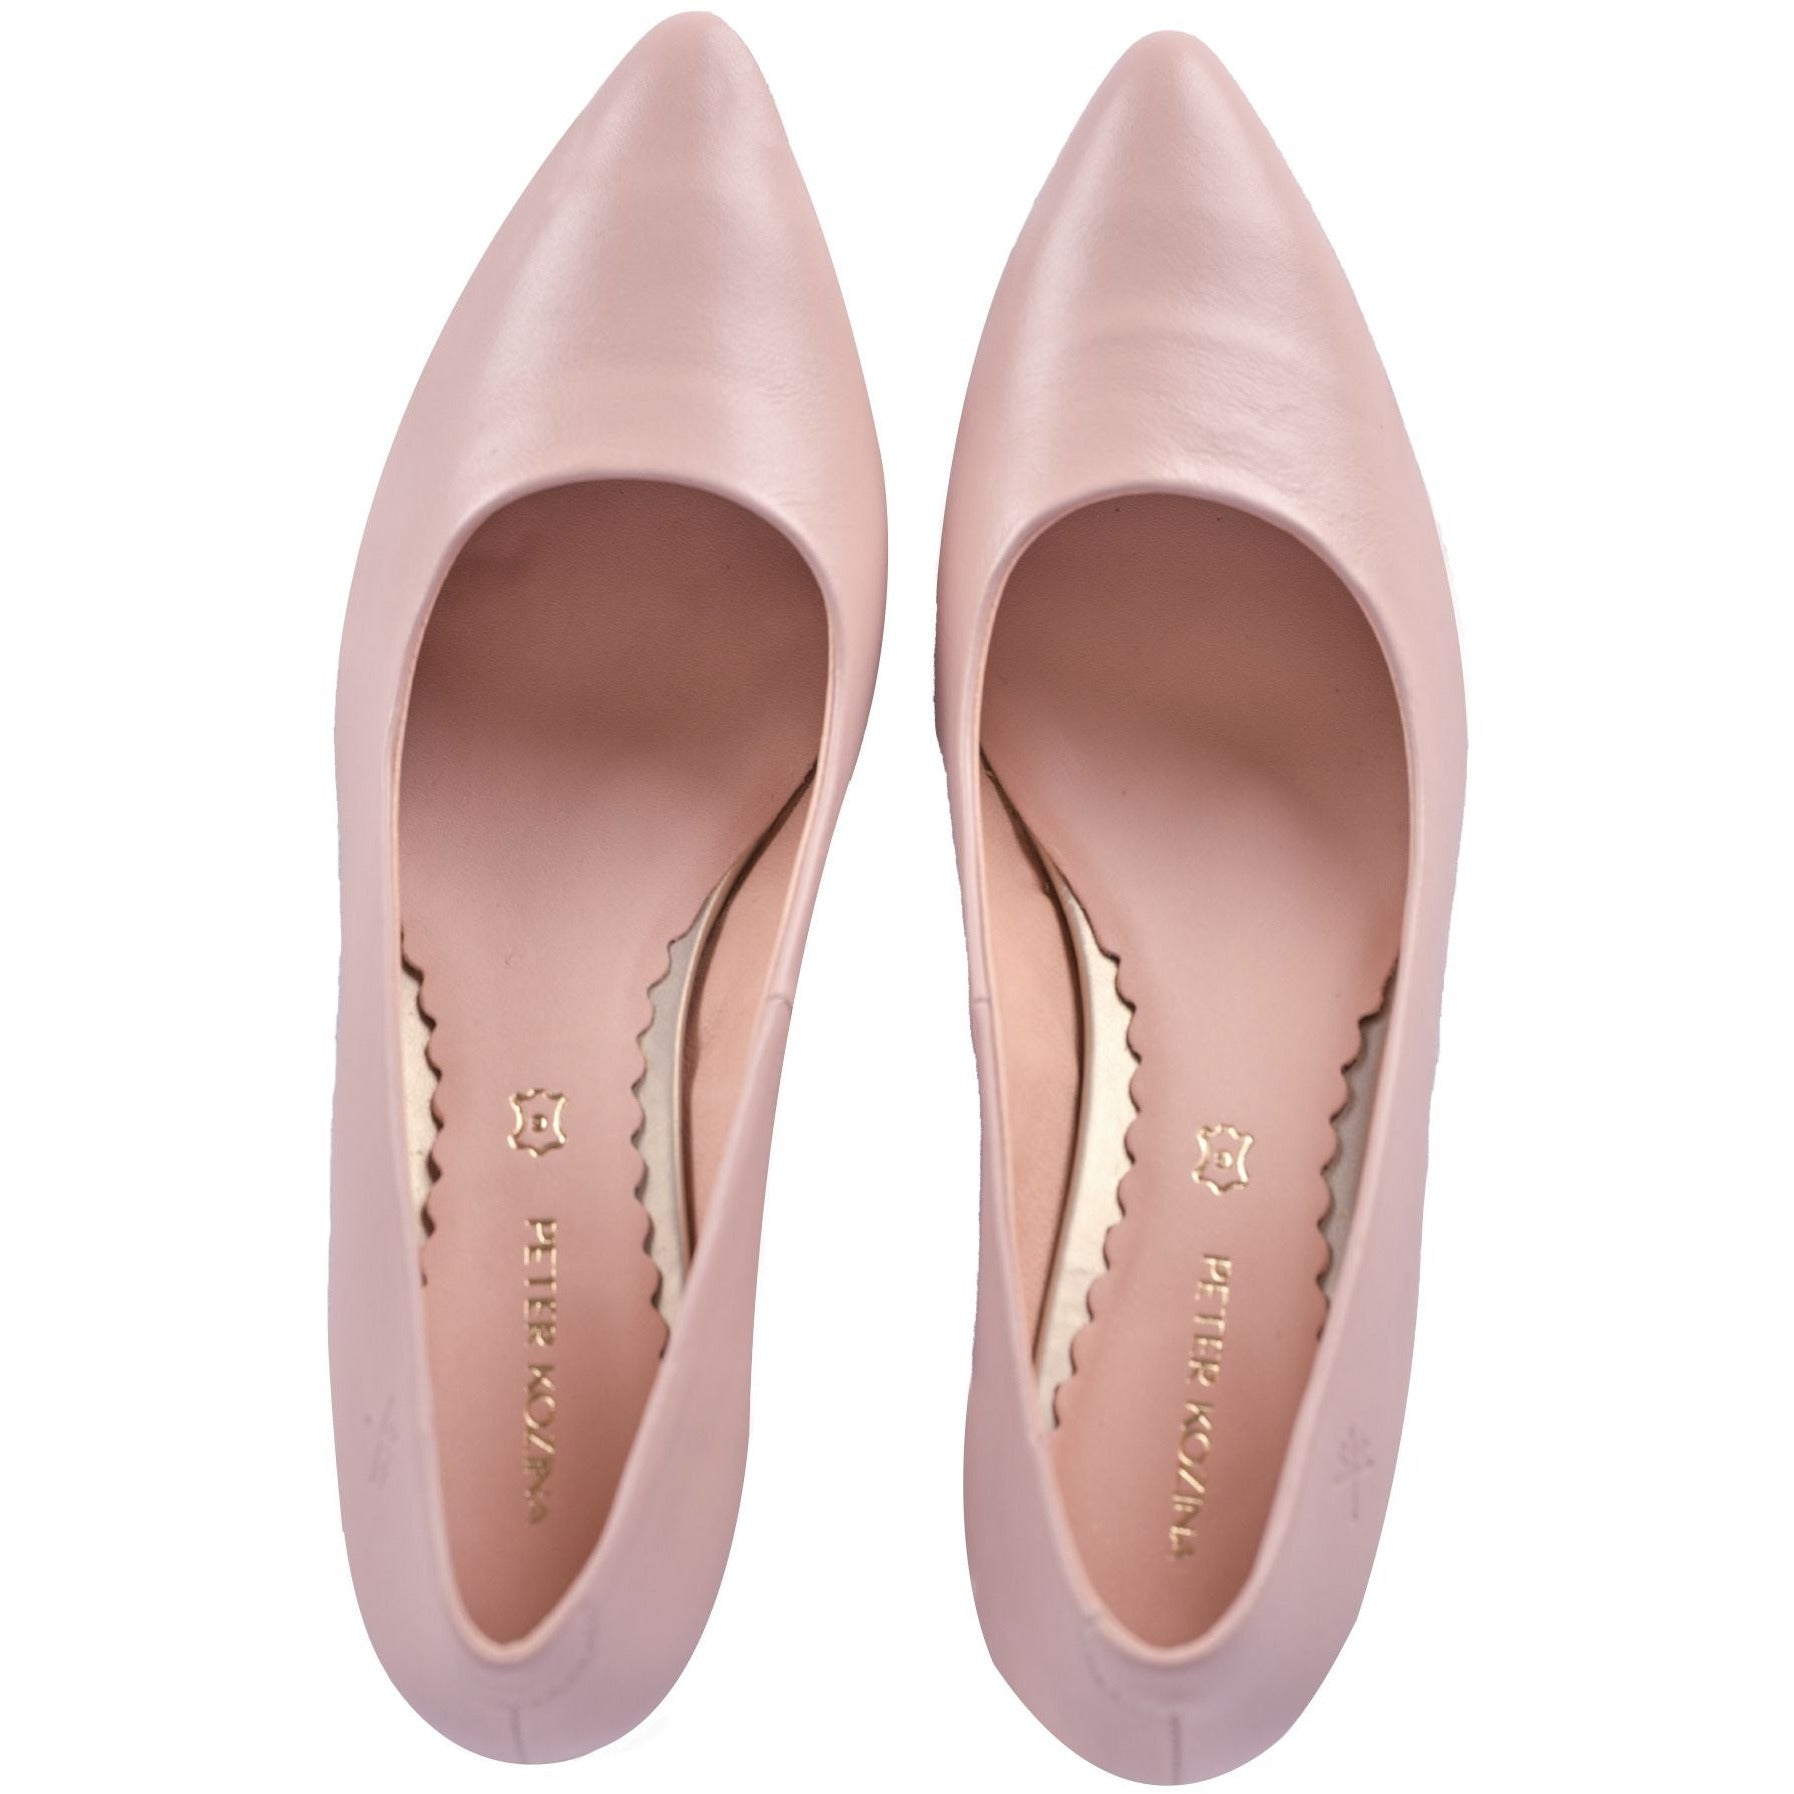 Genuine leather on the innersole and upper, in these elegant nude heel pumps.